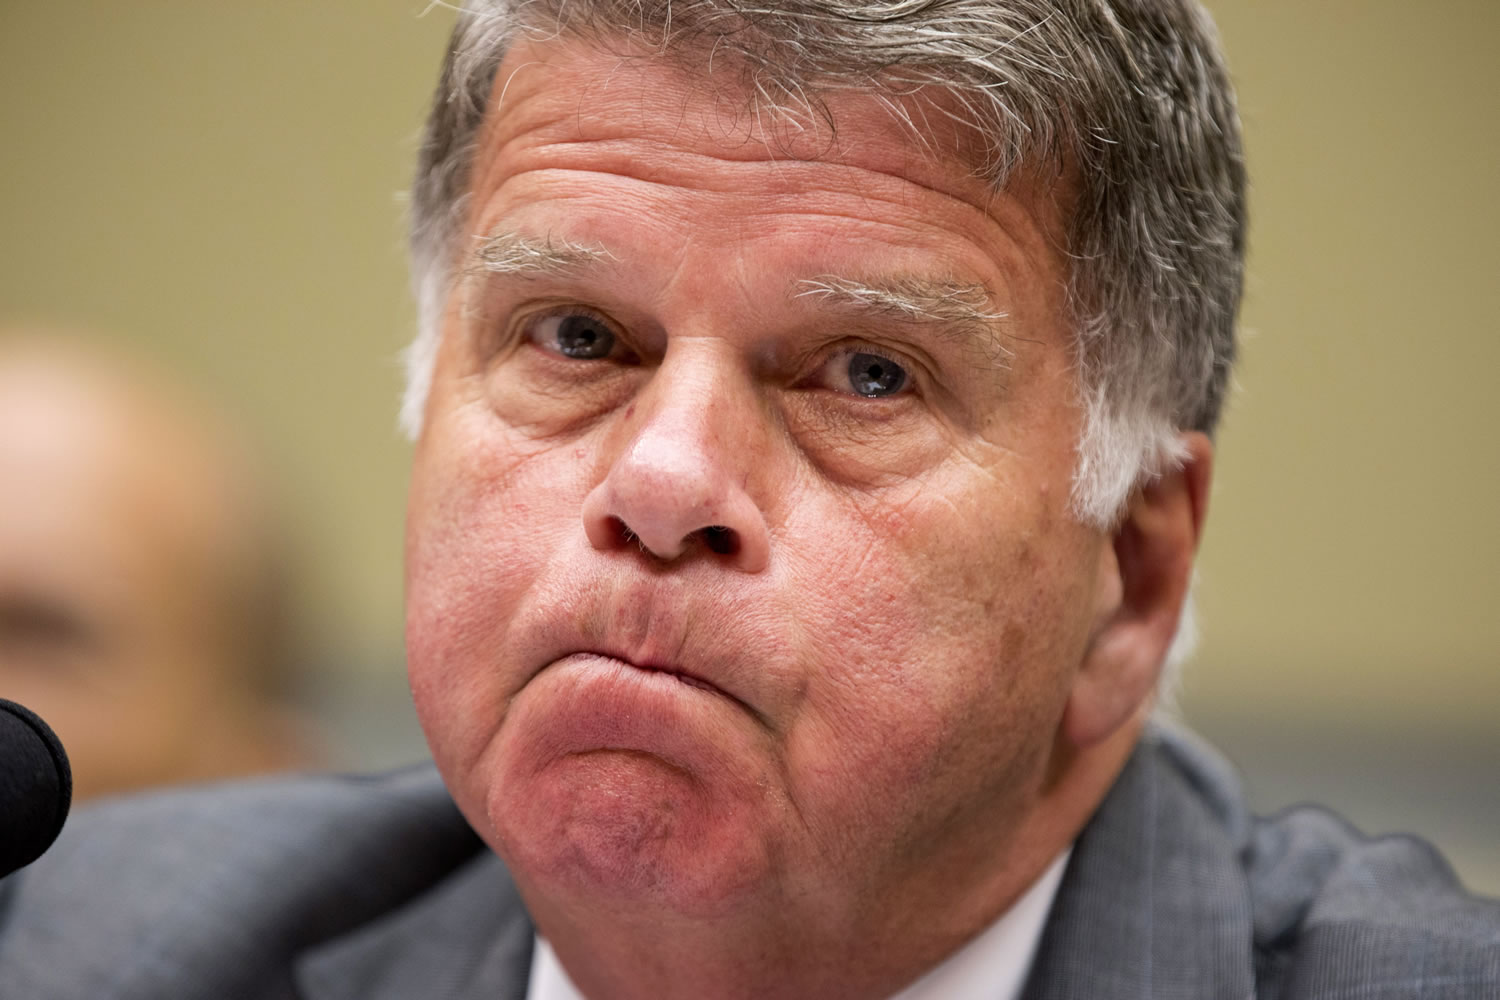 Archivist of the United States David Ferriero, testifies on Capitol Hill in Washington on Tuesday before the House Oversight and Government Reform Committee hearing on Lois Lerneru2019s missing emails.